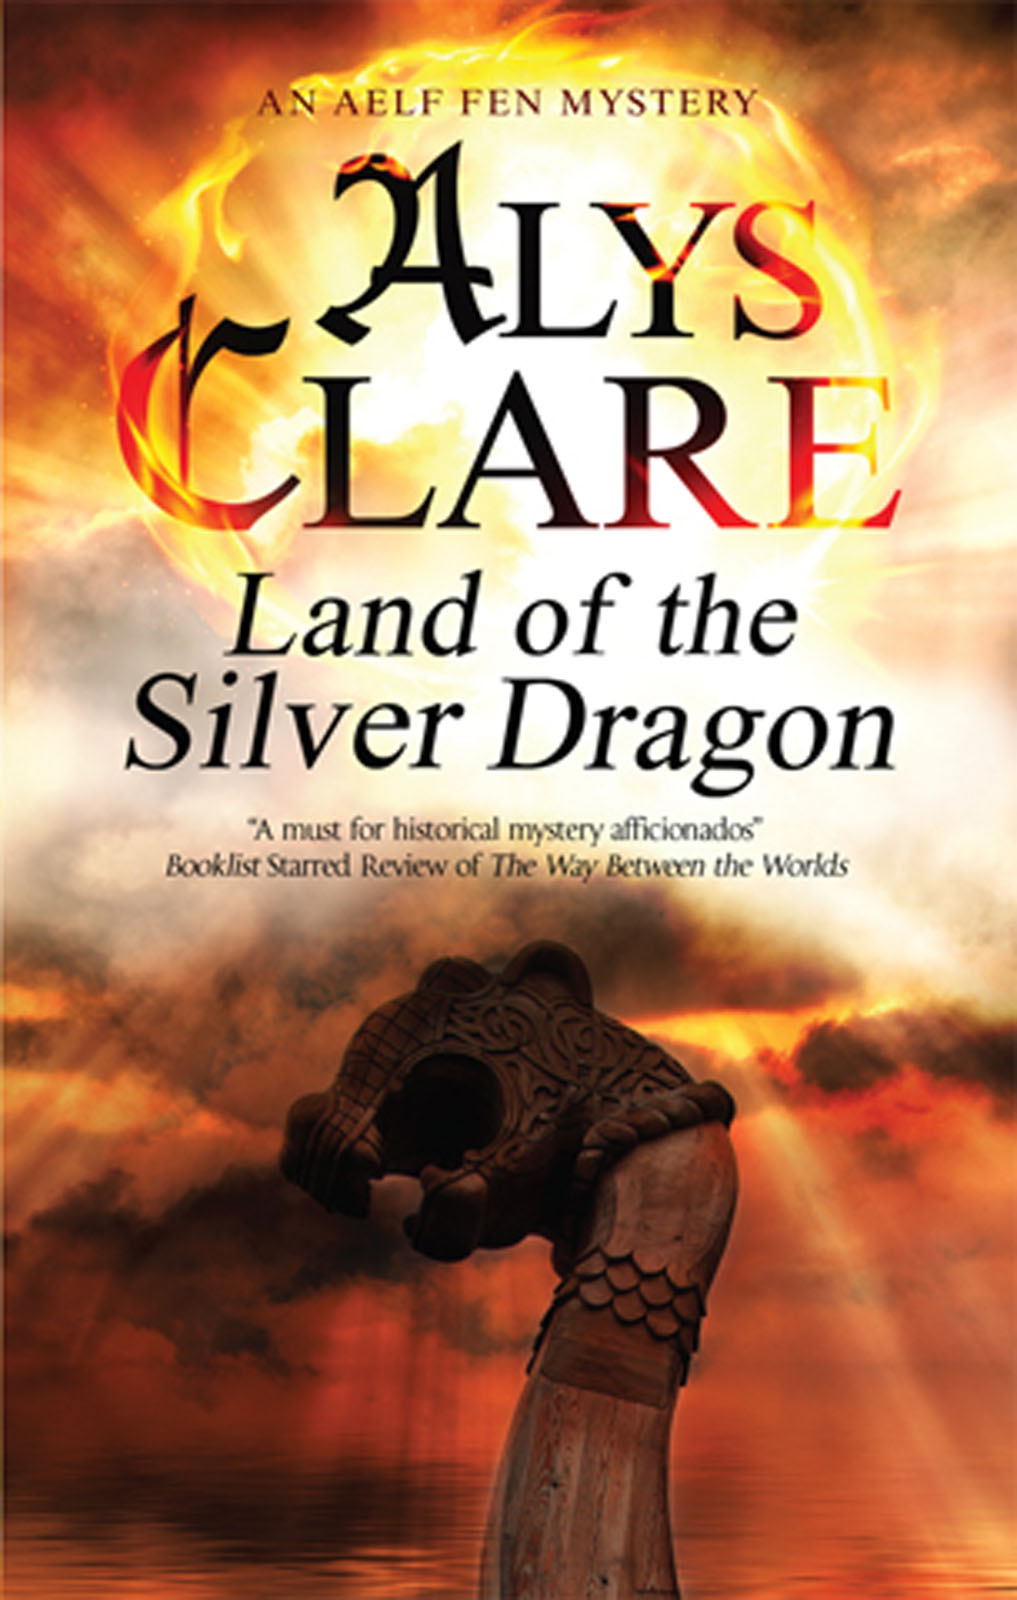 Land of the Silver Dragon (2013) by Alys Clare